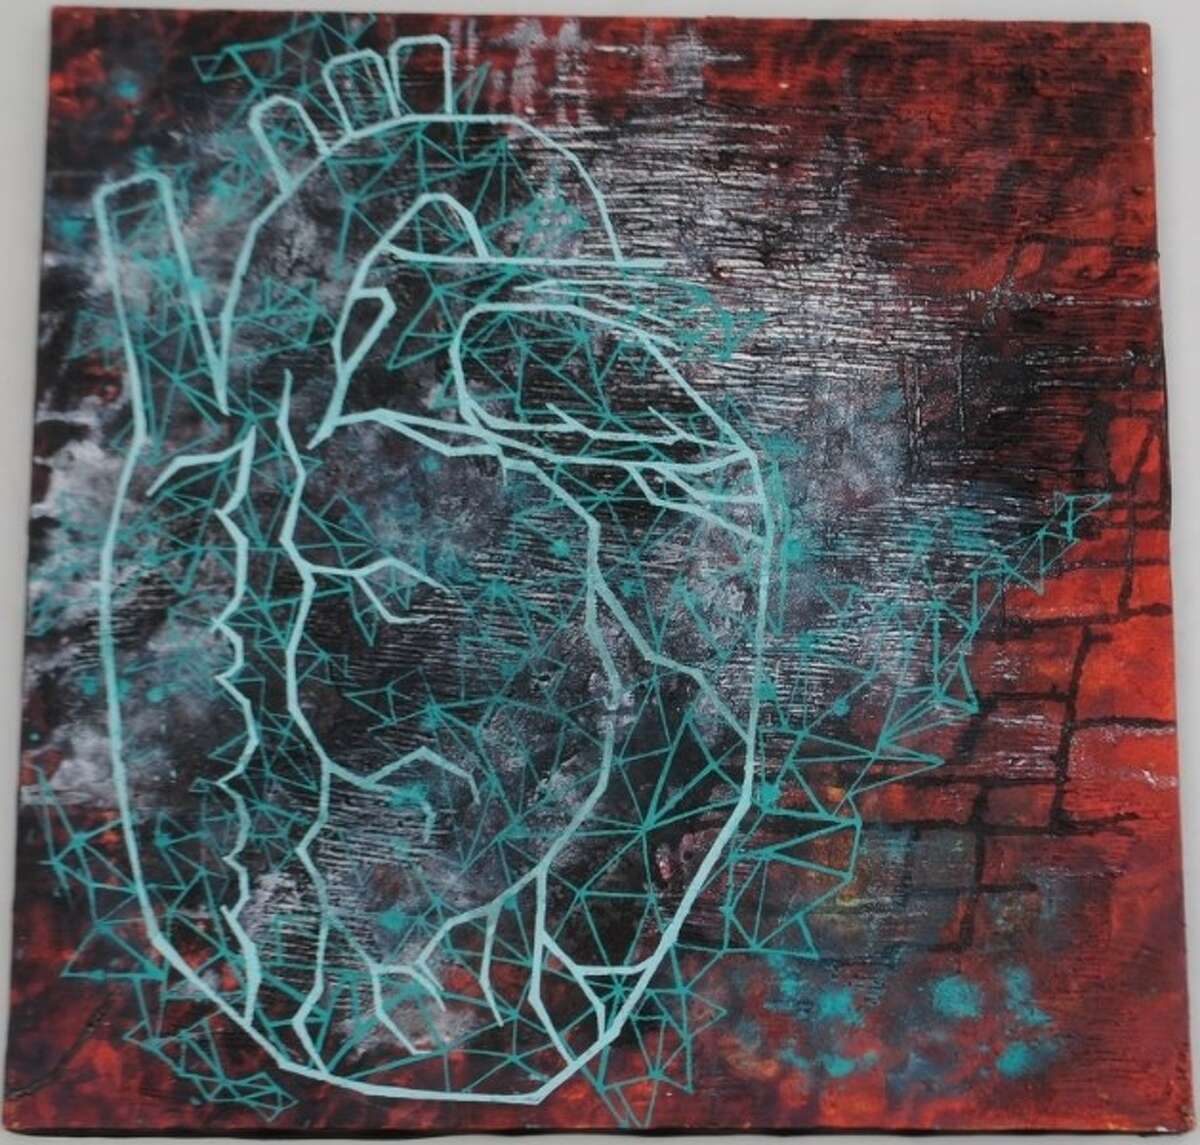 One of the pieces that will be on display for "Phases," Houston native Lisa Peters' first art exhibition, on display at the Sugar Land Art Center & Gallery from Jan. 17 to Jan. 26.